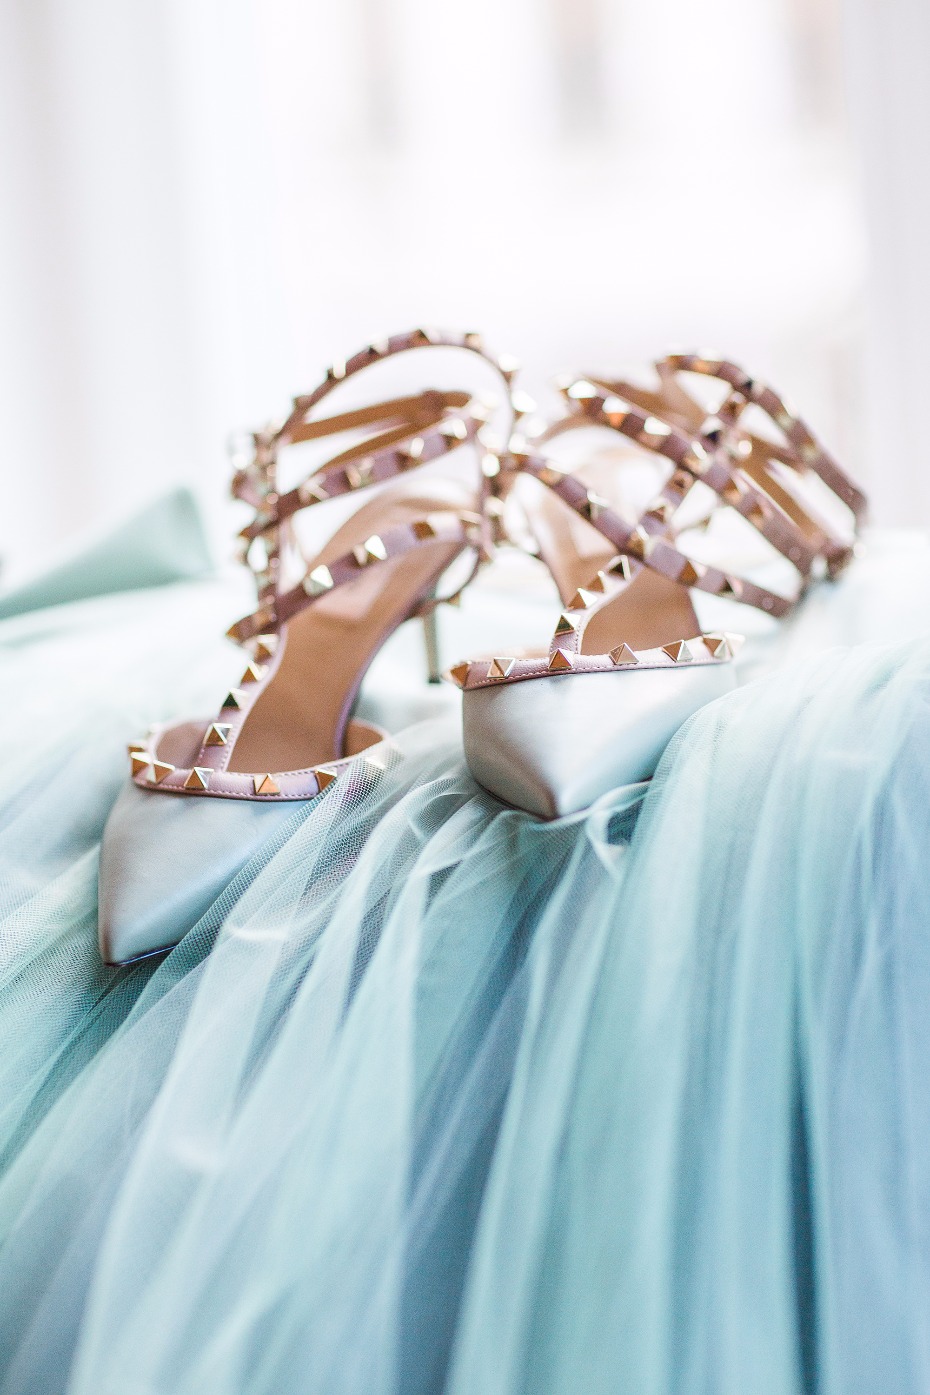 Rock studded heels and blue tulle for this winter bridal look